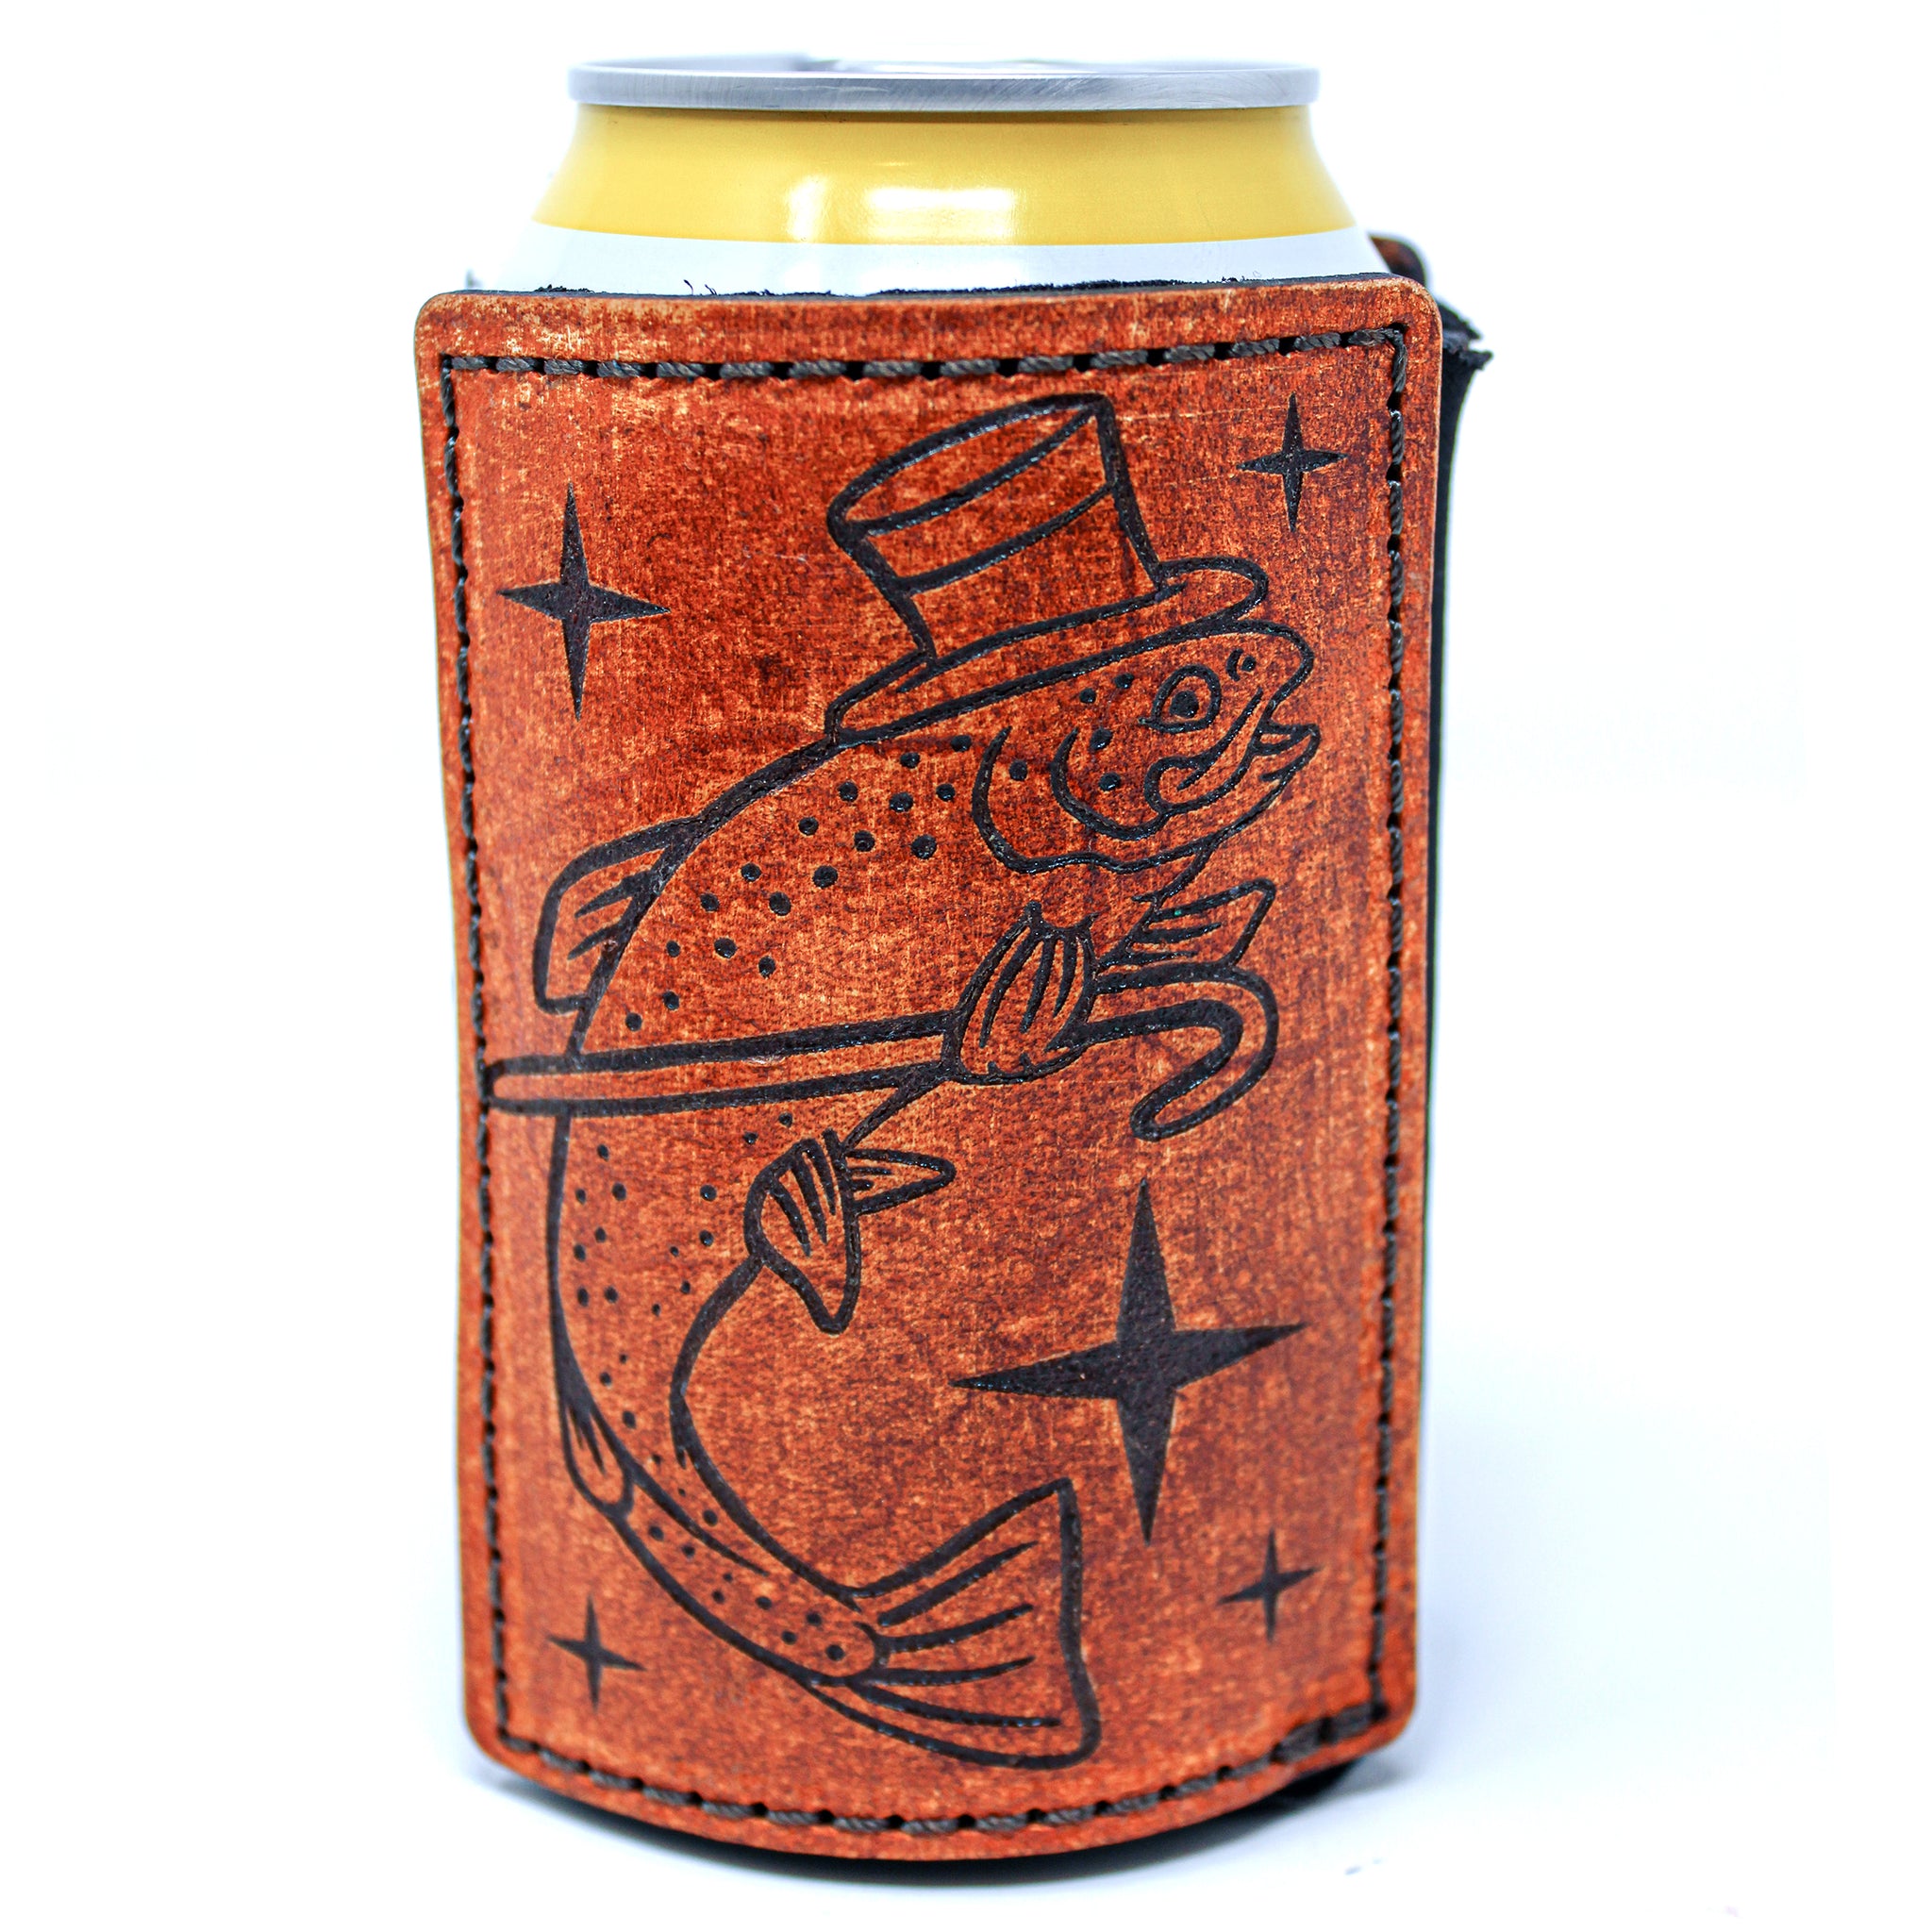 Leather Patch Drink Sleeve - Dancin' Trout